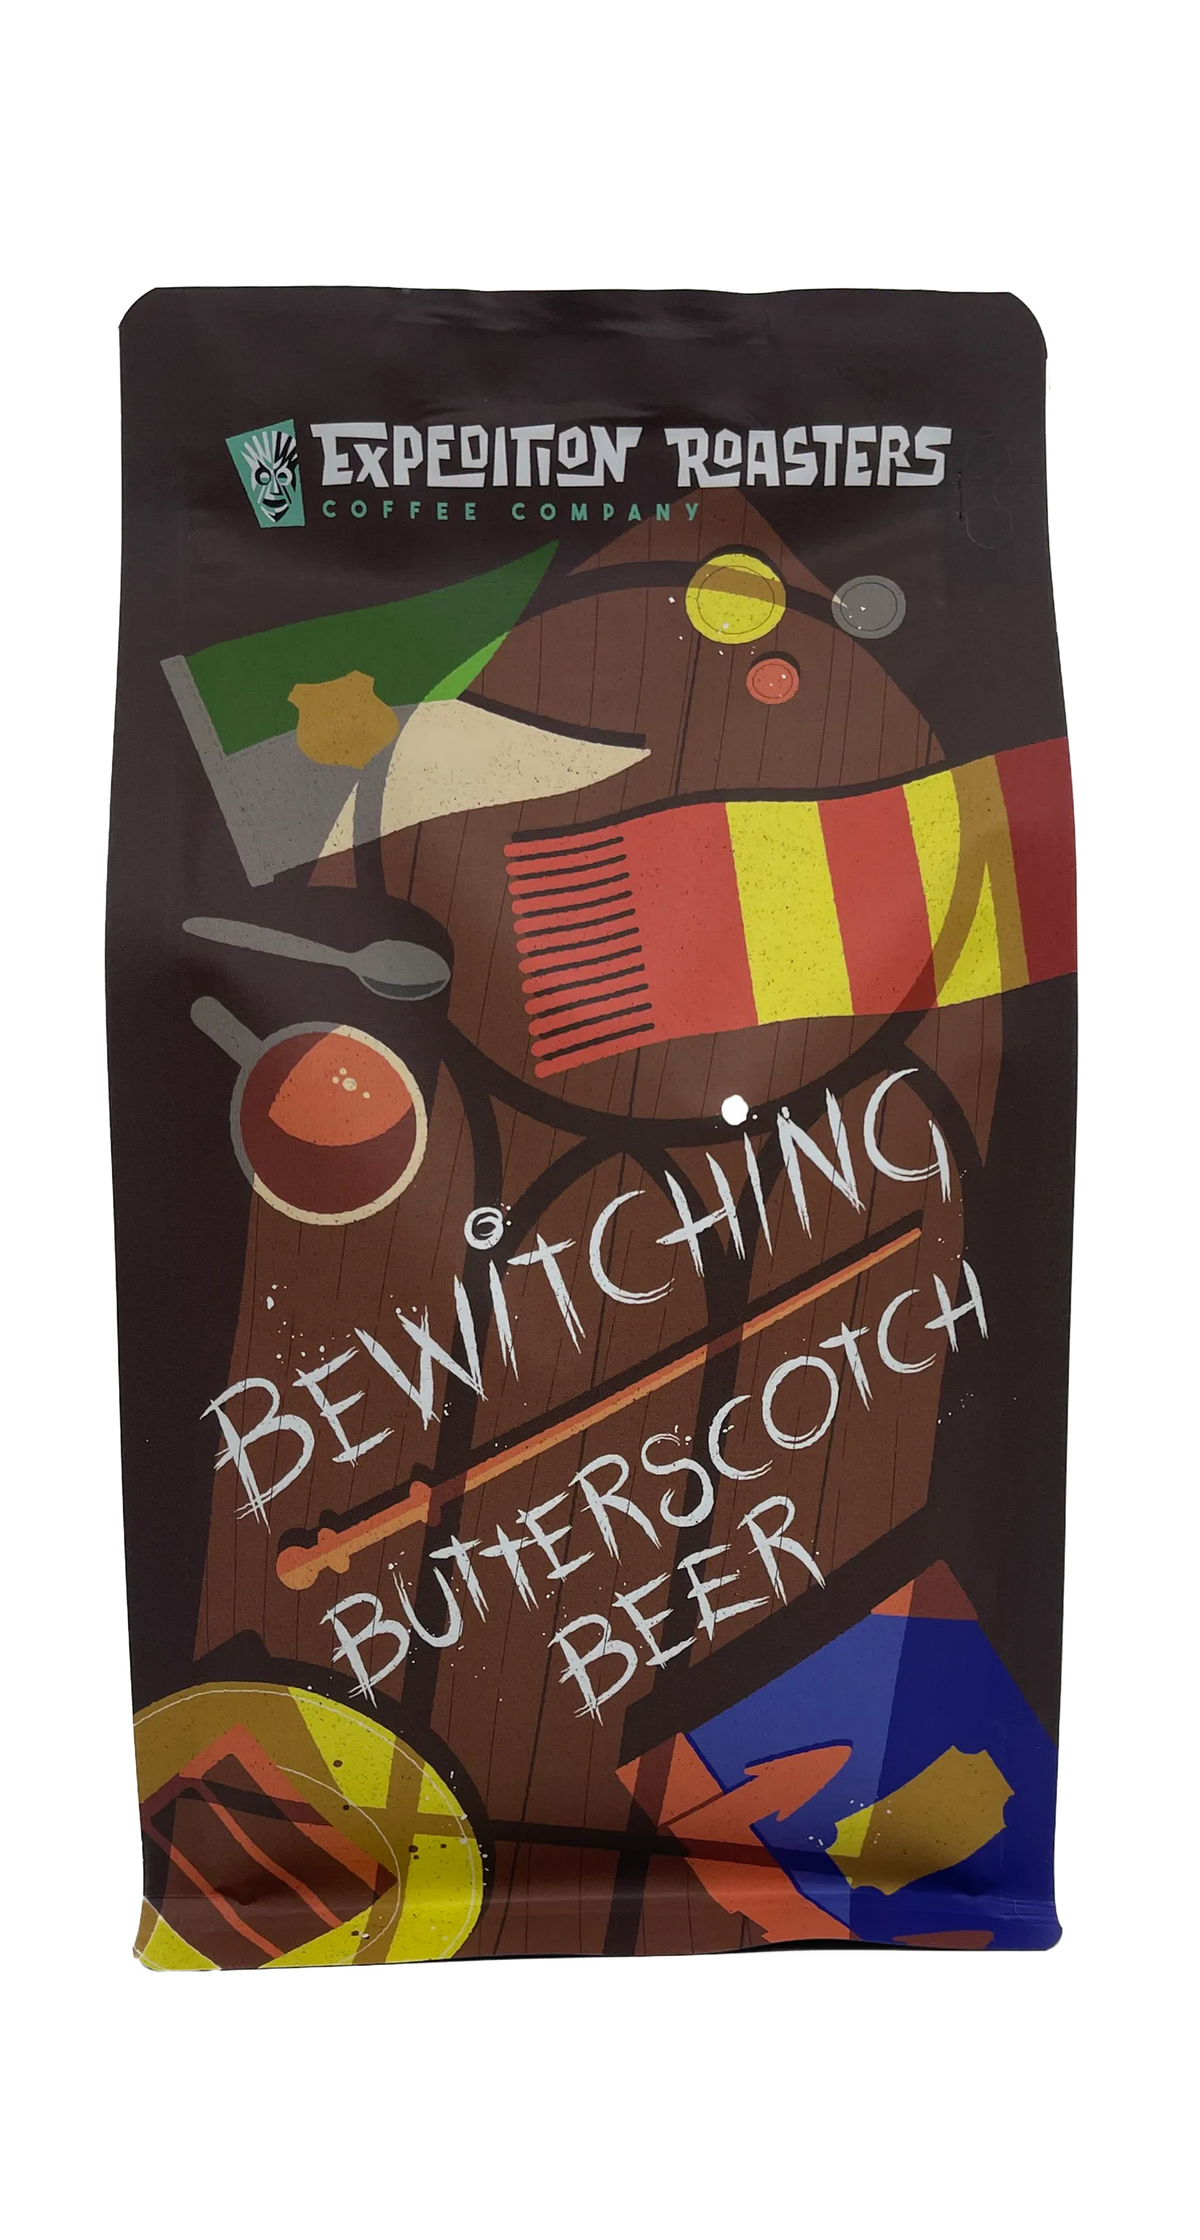 Bewitching Butterscotch Beer